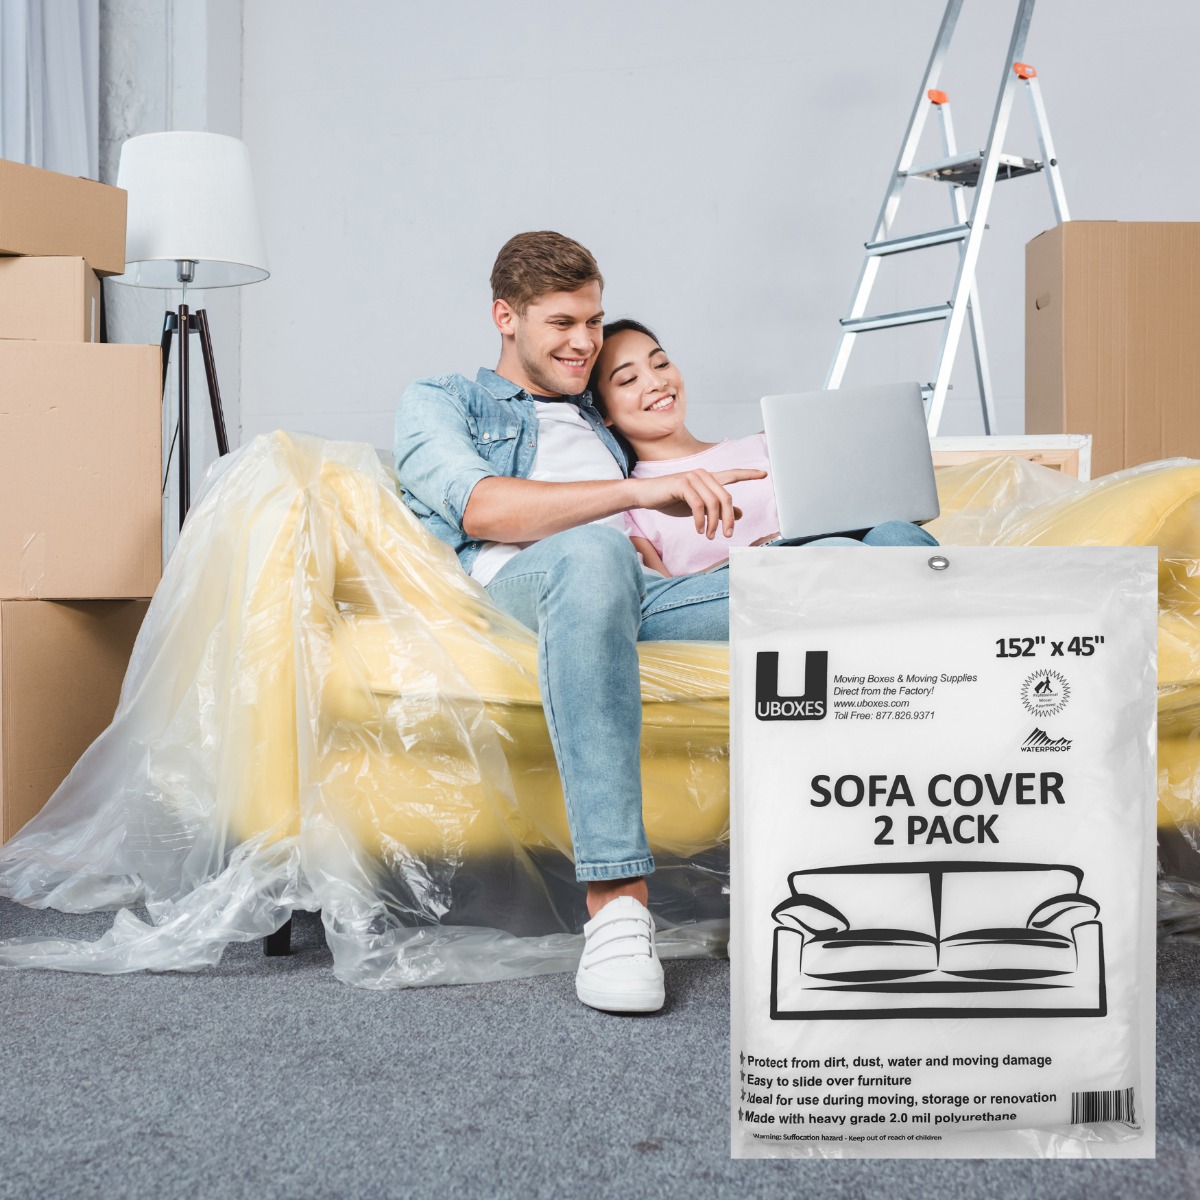 Sofa Moving Covers 2 Pack 45 x 152 Moving & Storage Bags Uboxes